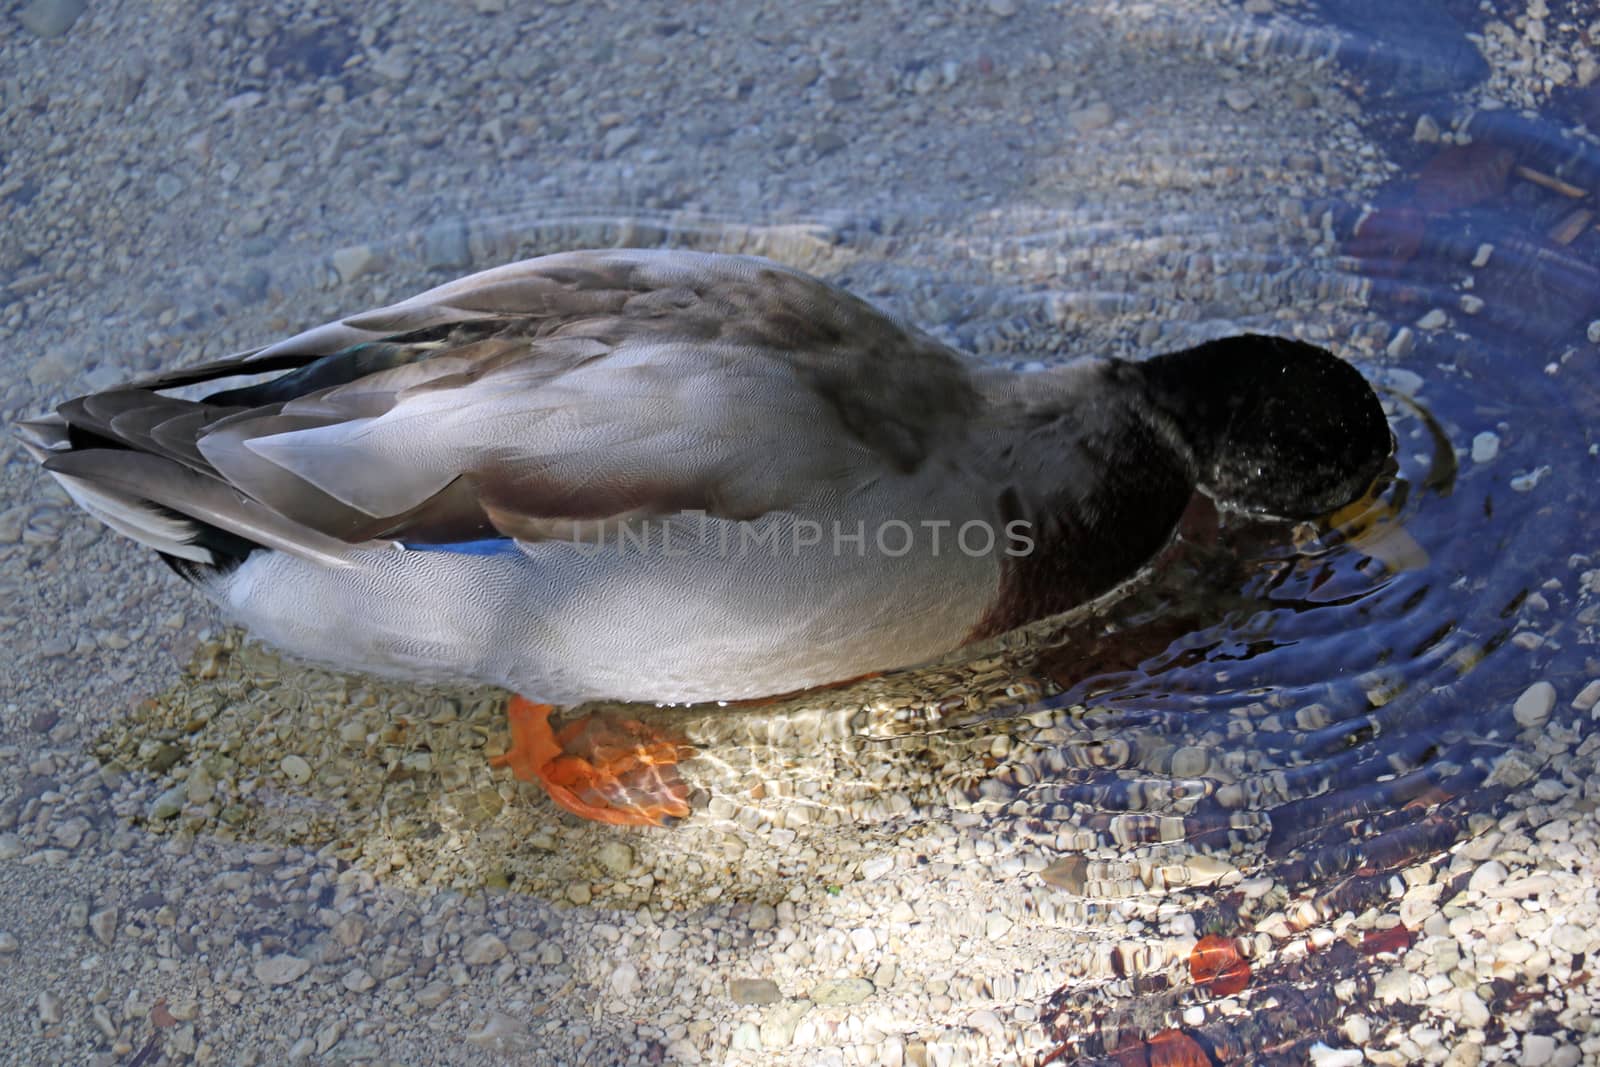 Wild duck come ashore from the water